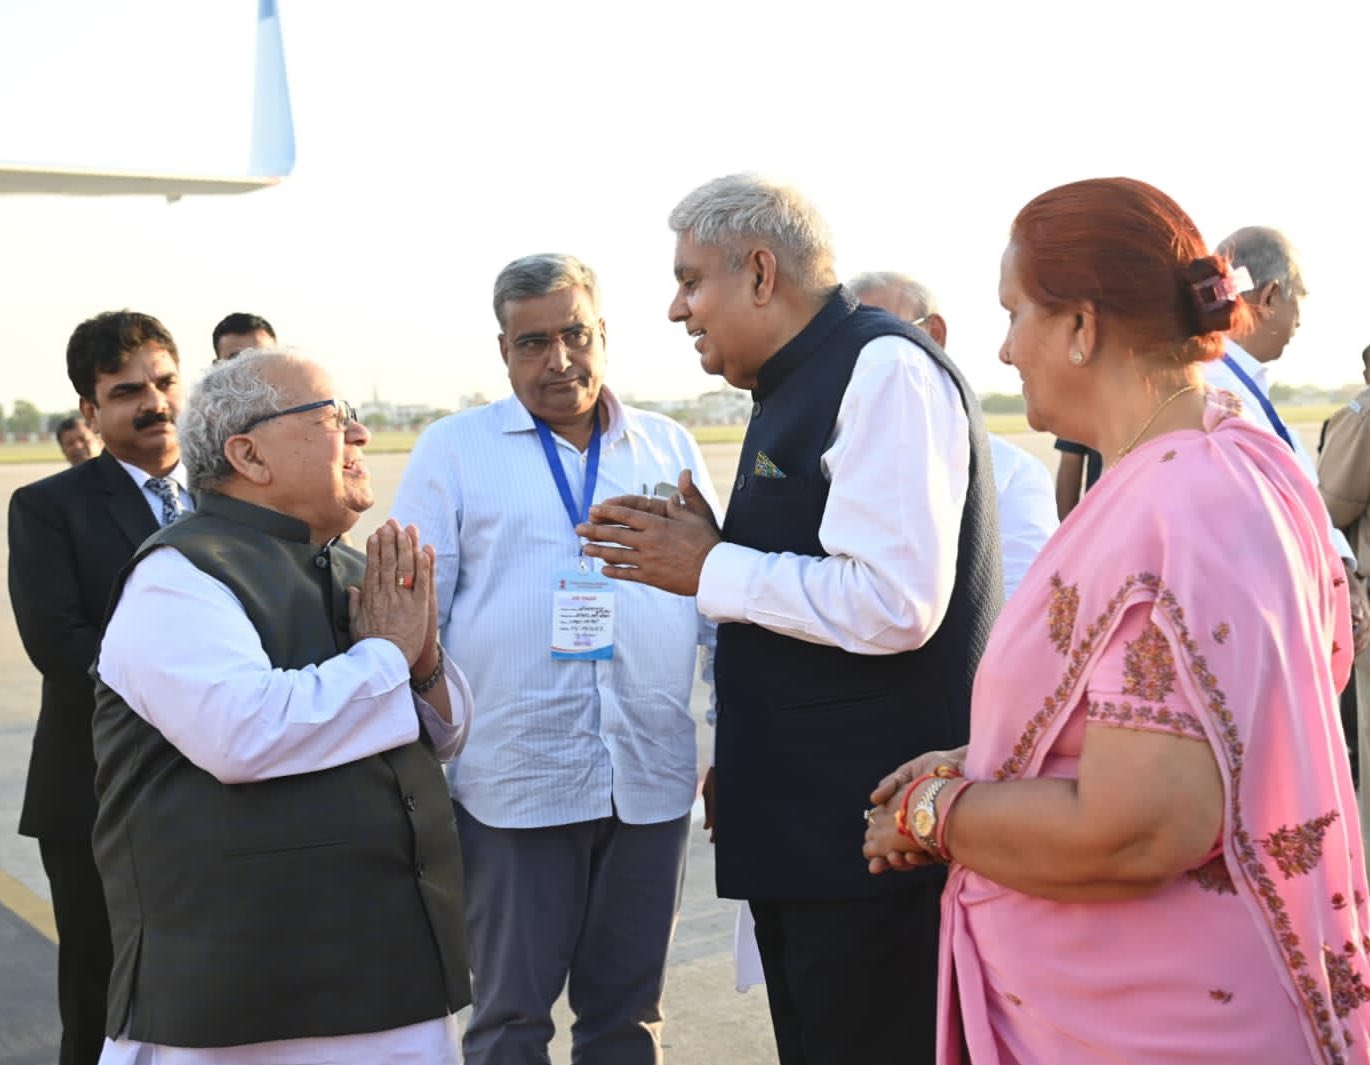 The Vice-President, Shri Jagdeep Dhankhar and Dr Sudesh Dhankhar being bid farewell by Shri Kalraj Mishra, Governor of Rajasthan, Shri Lalchand Kataria, Minister in Government of Rajasthan and Shri Ramcharan Bohra, Member of Parliament in Jaipur, Rajasthan on October 6, 2023.